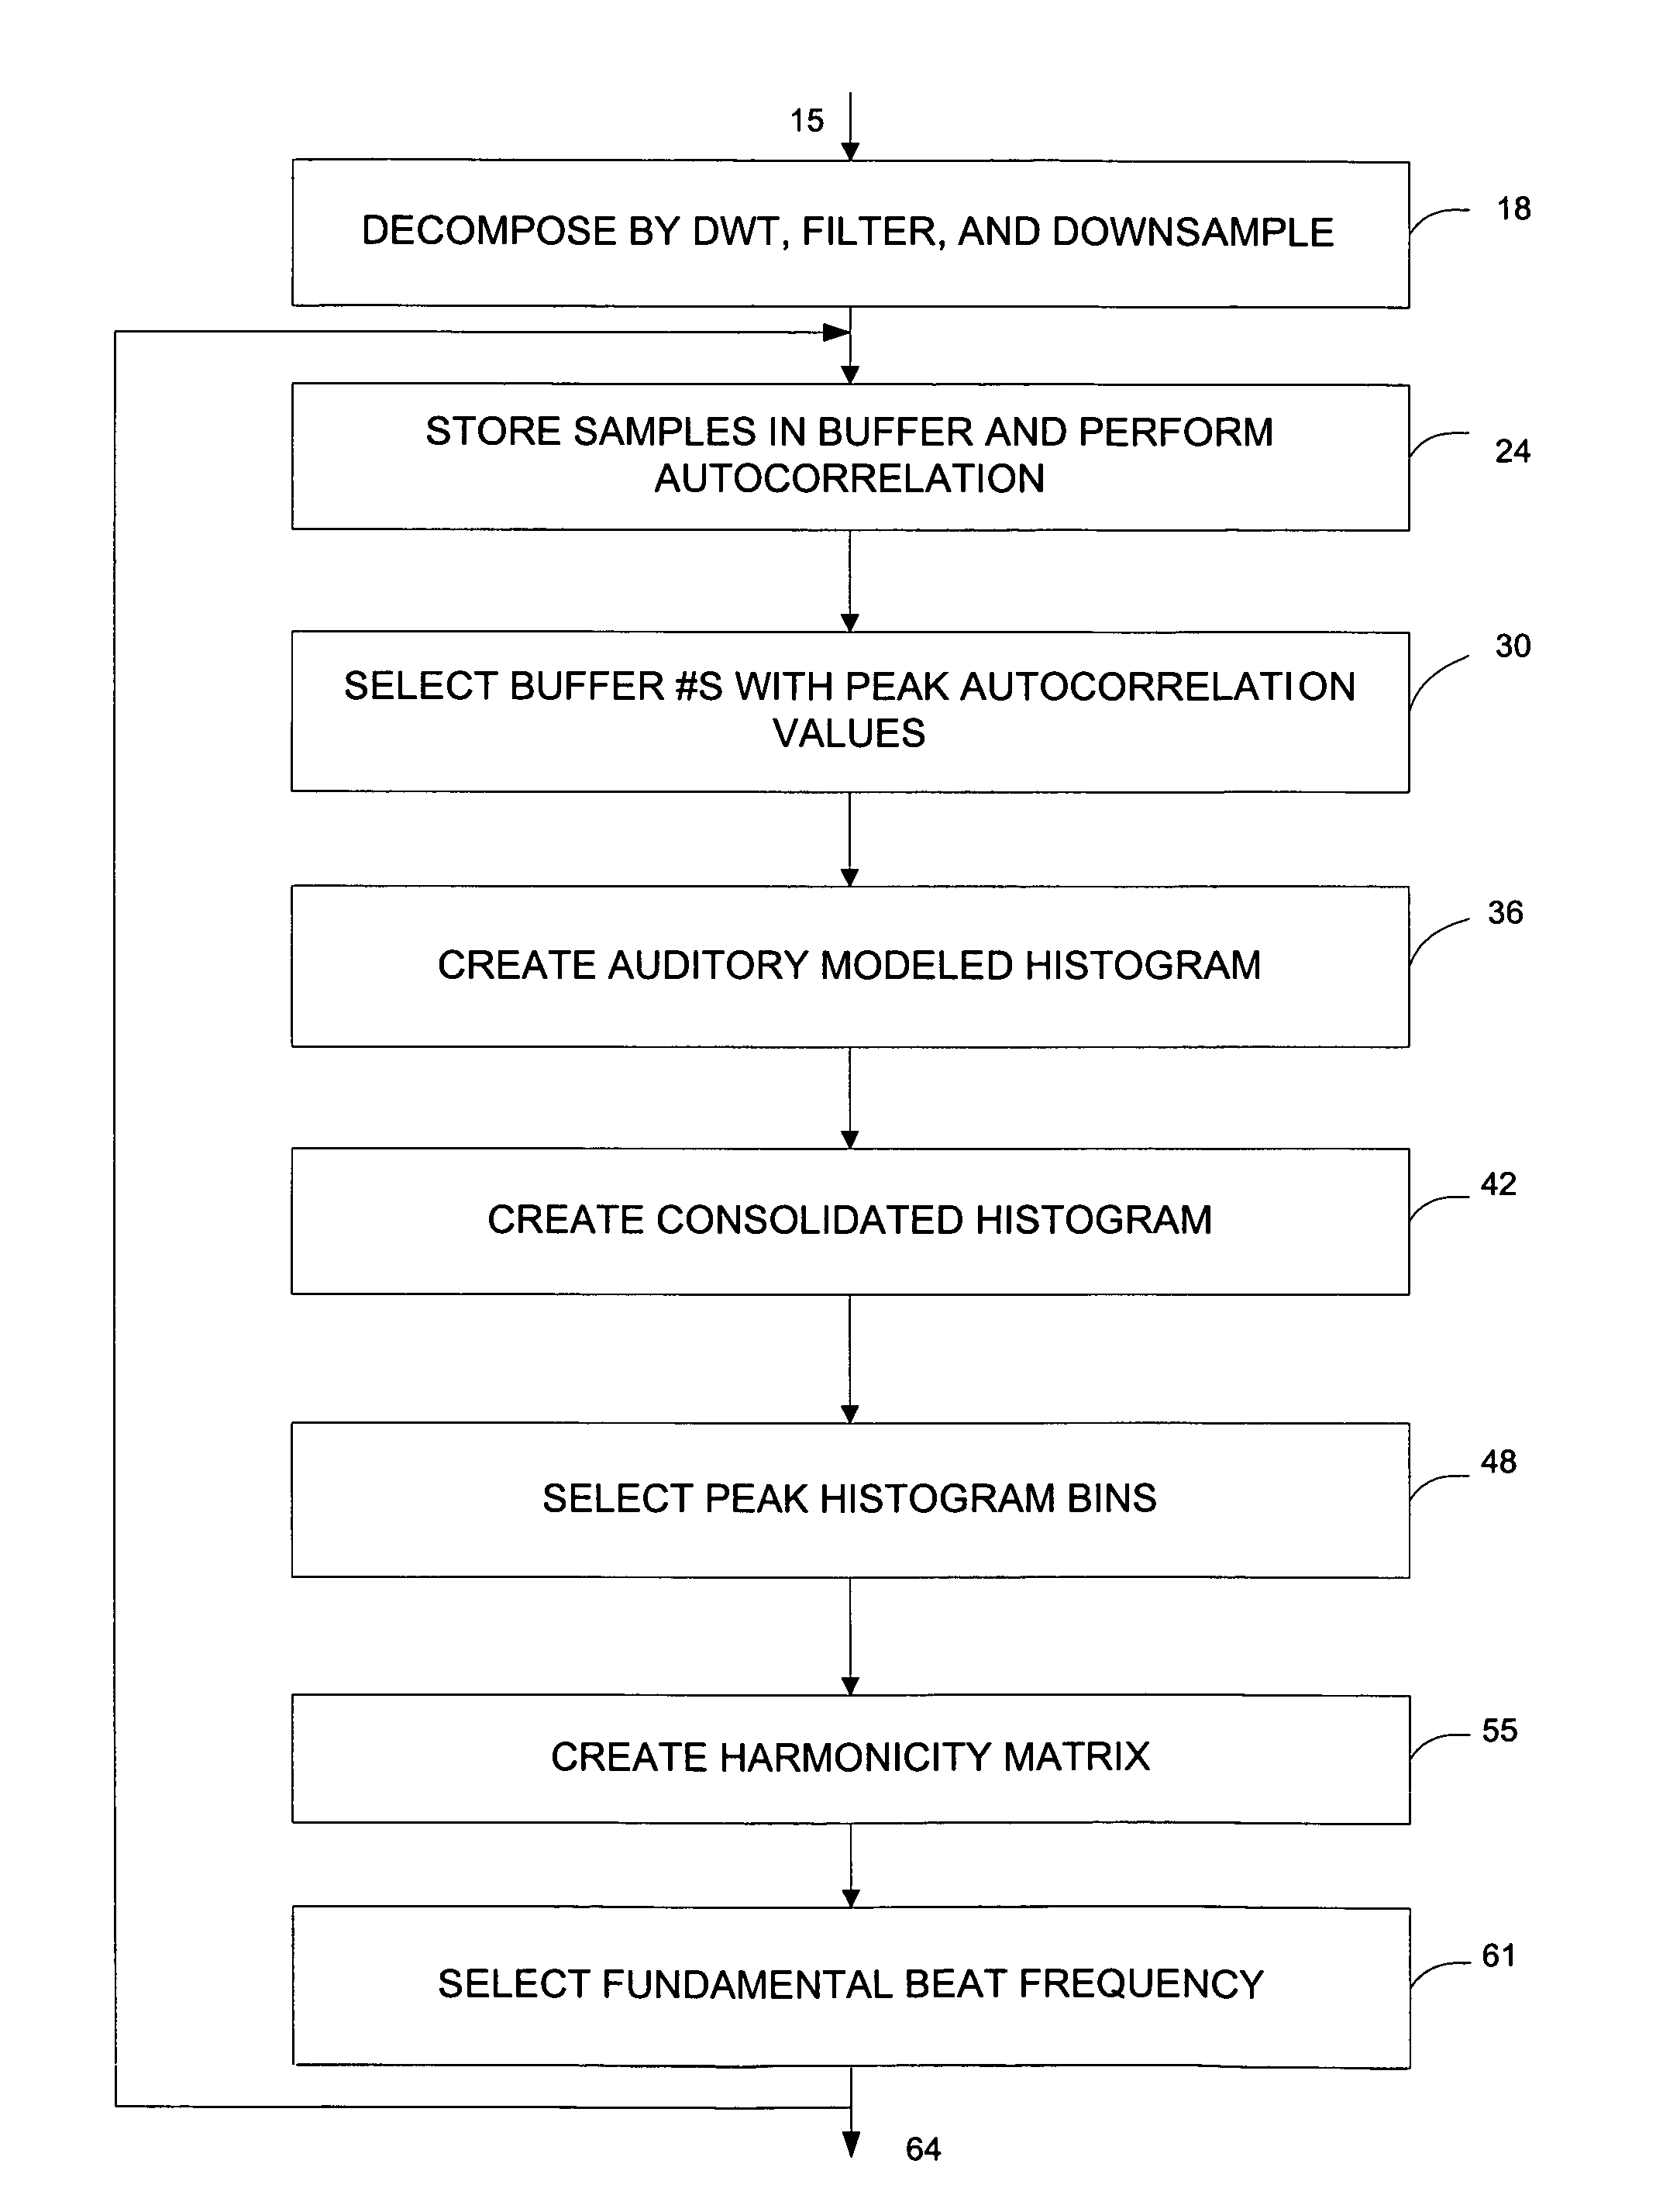 Method and apparatus for synchronizing audio and video components of multimedia presentations by identifying beats in a music signal